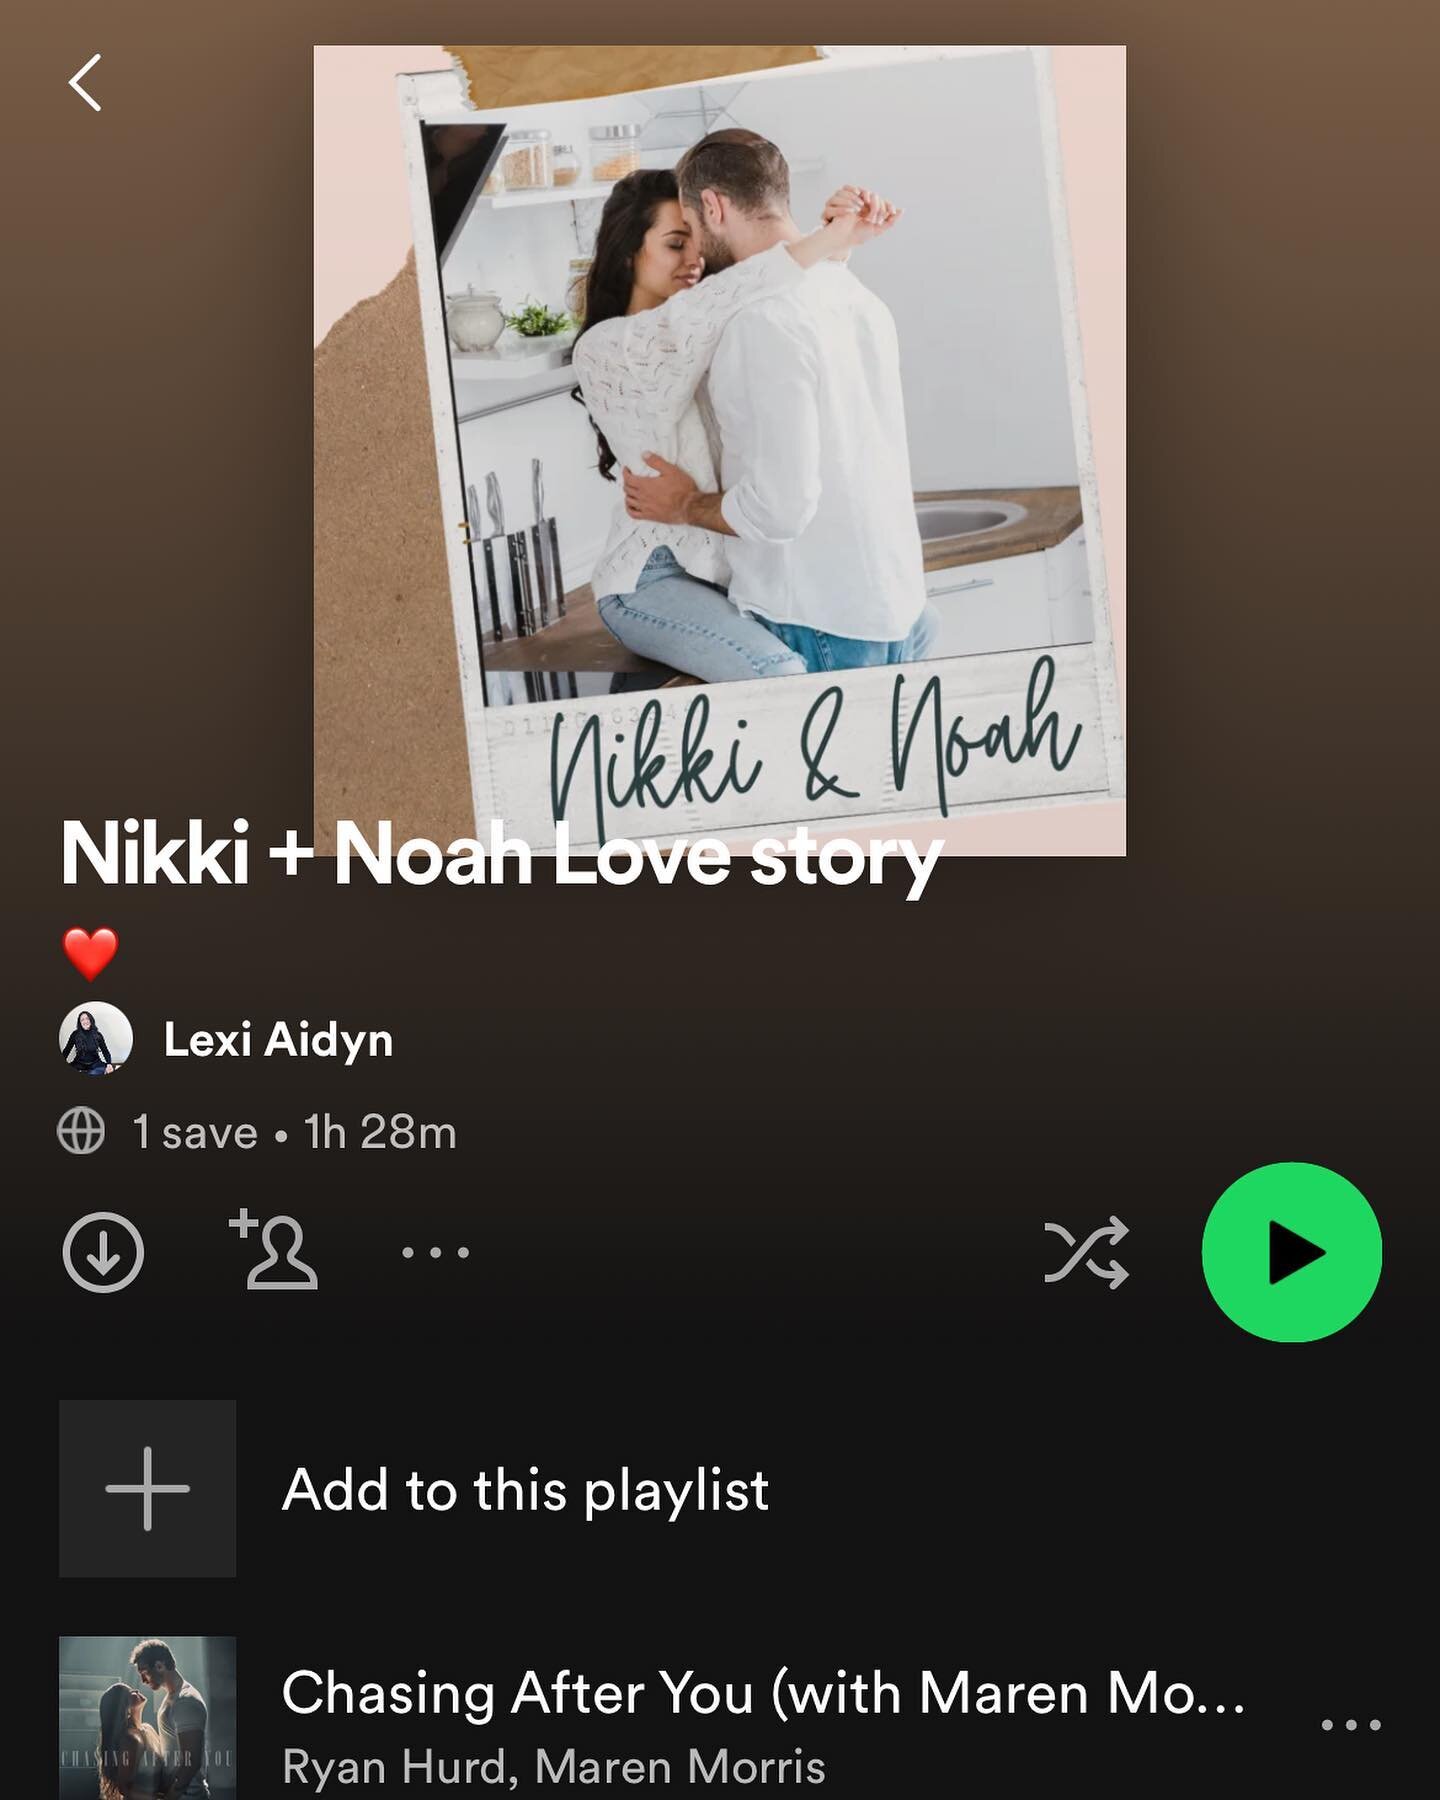 Do you listen to music &amp; playlist that is shared in books?
.
I have found great music that way. 
.
Swipe and scan to hear Nikki &amp; Noah&rsquo;s love songs - on @spotify 
.
#amreadingromance #lovesongs #playlistspotify #mine2love